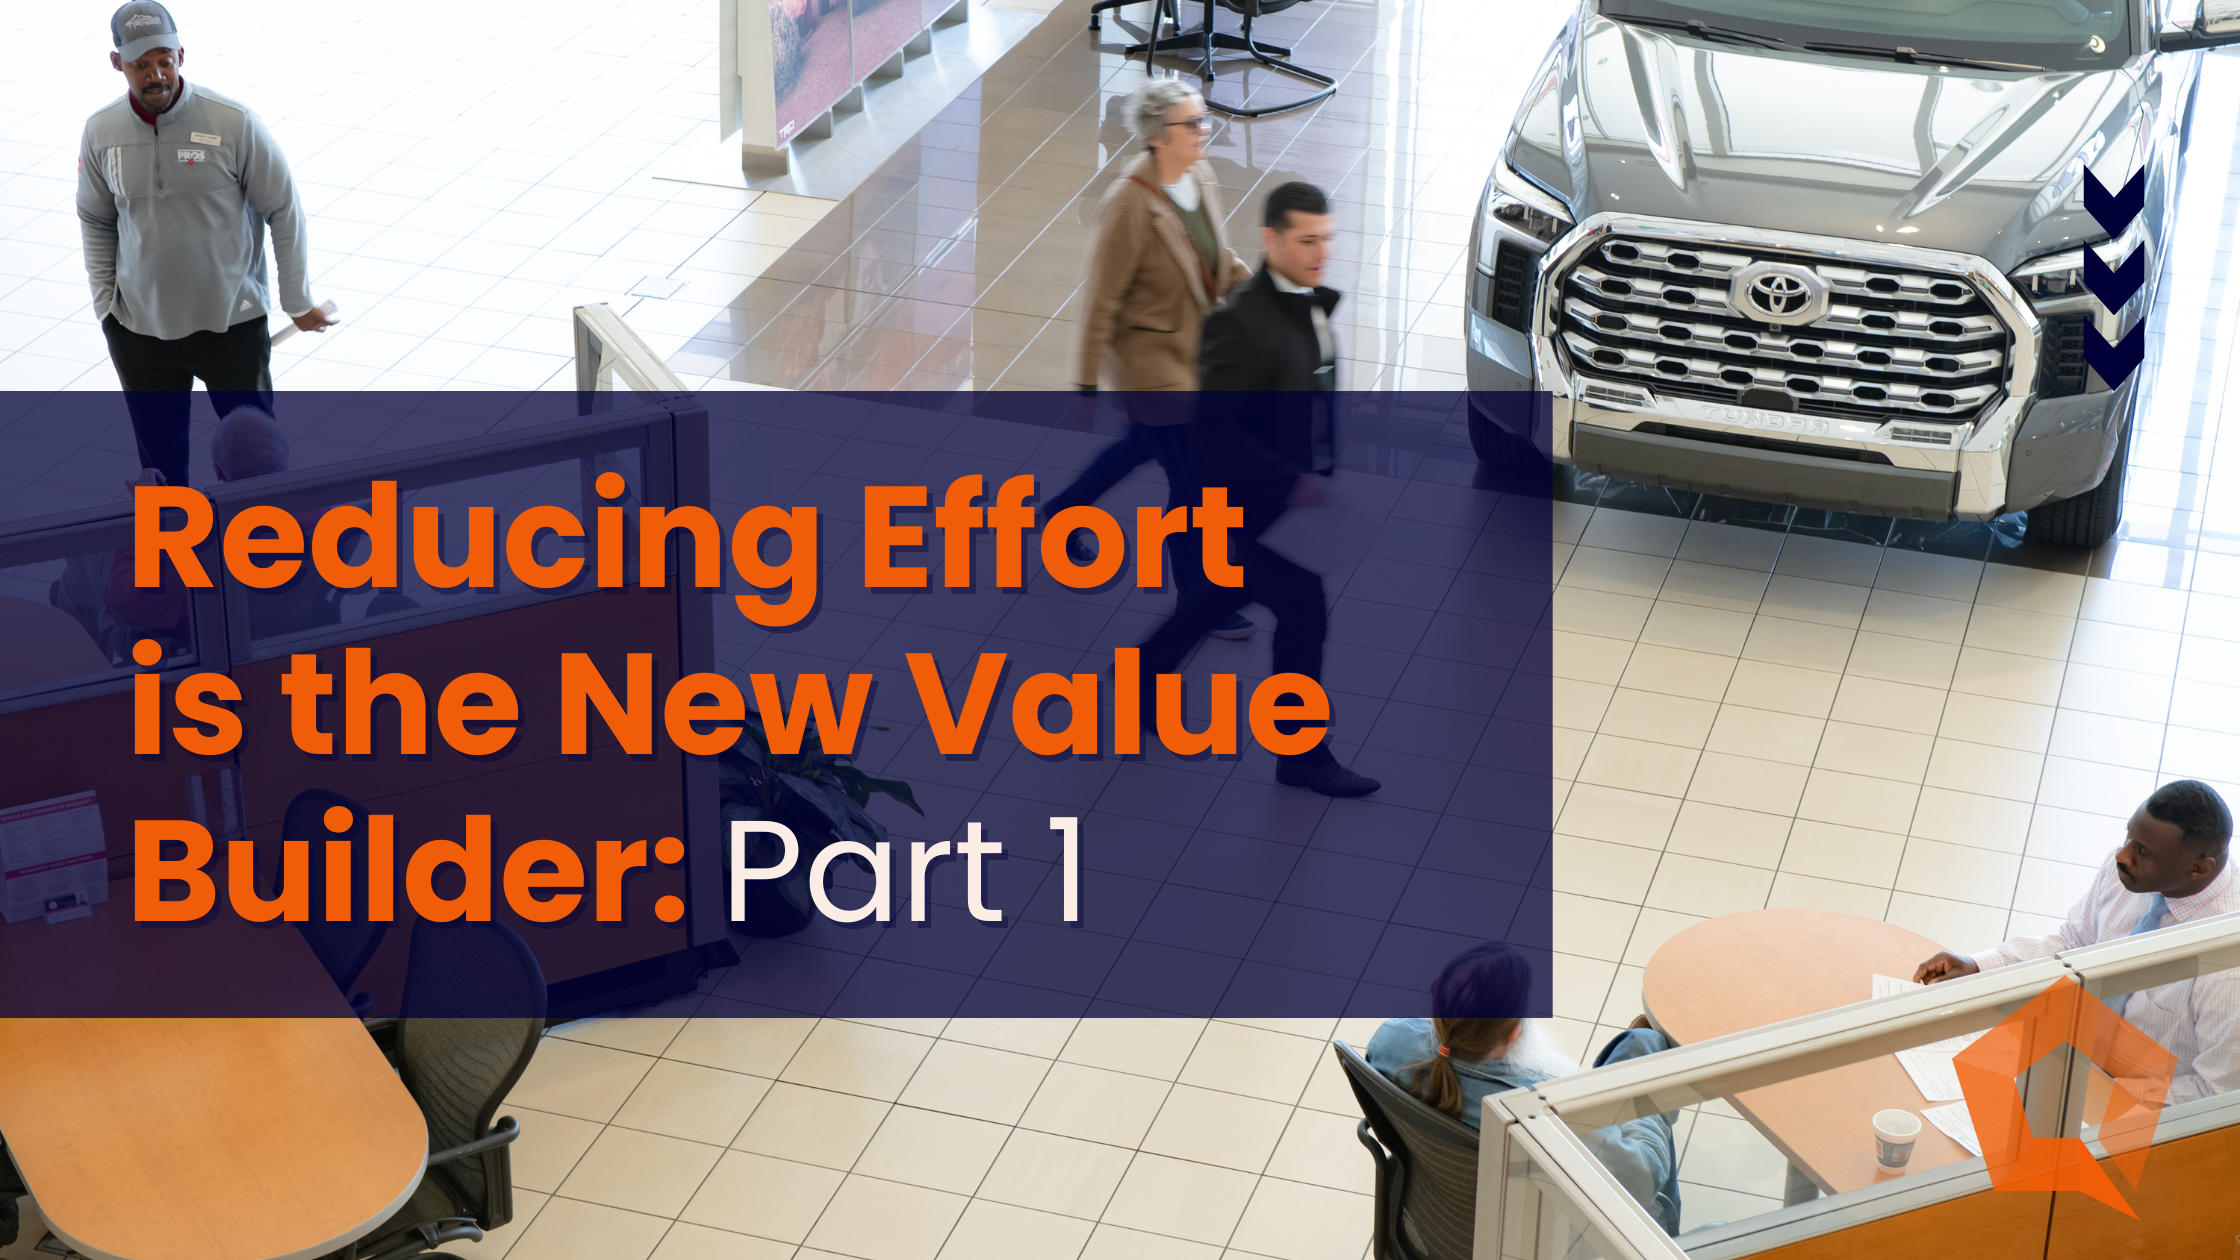 Reducing Effort is the New Value Builder